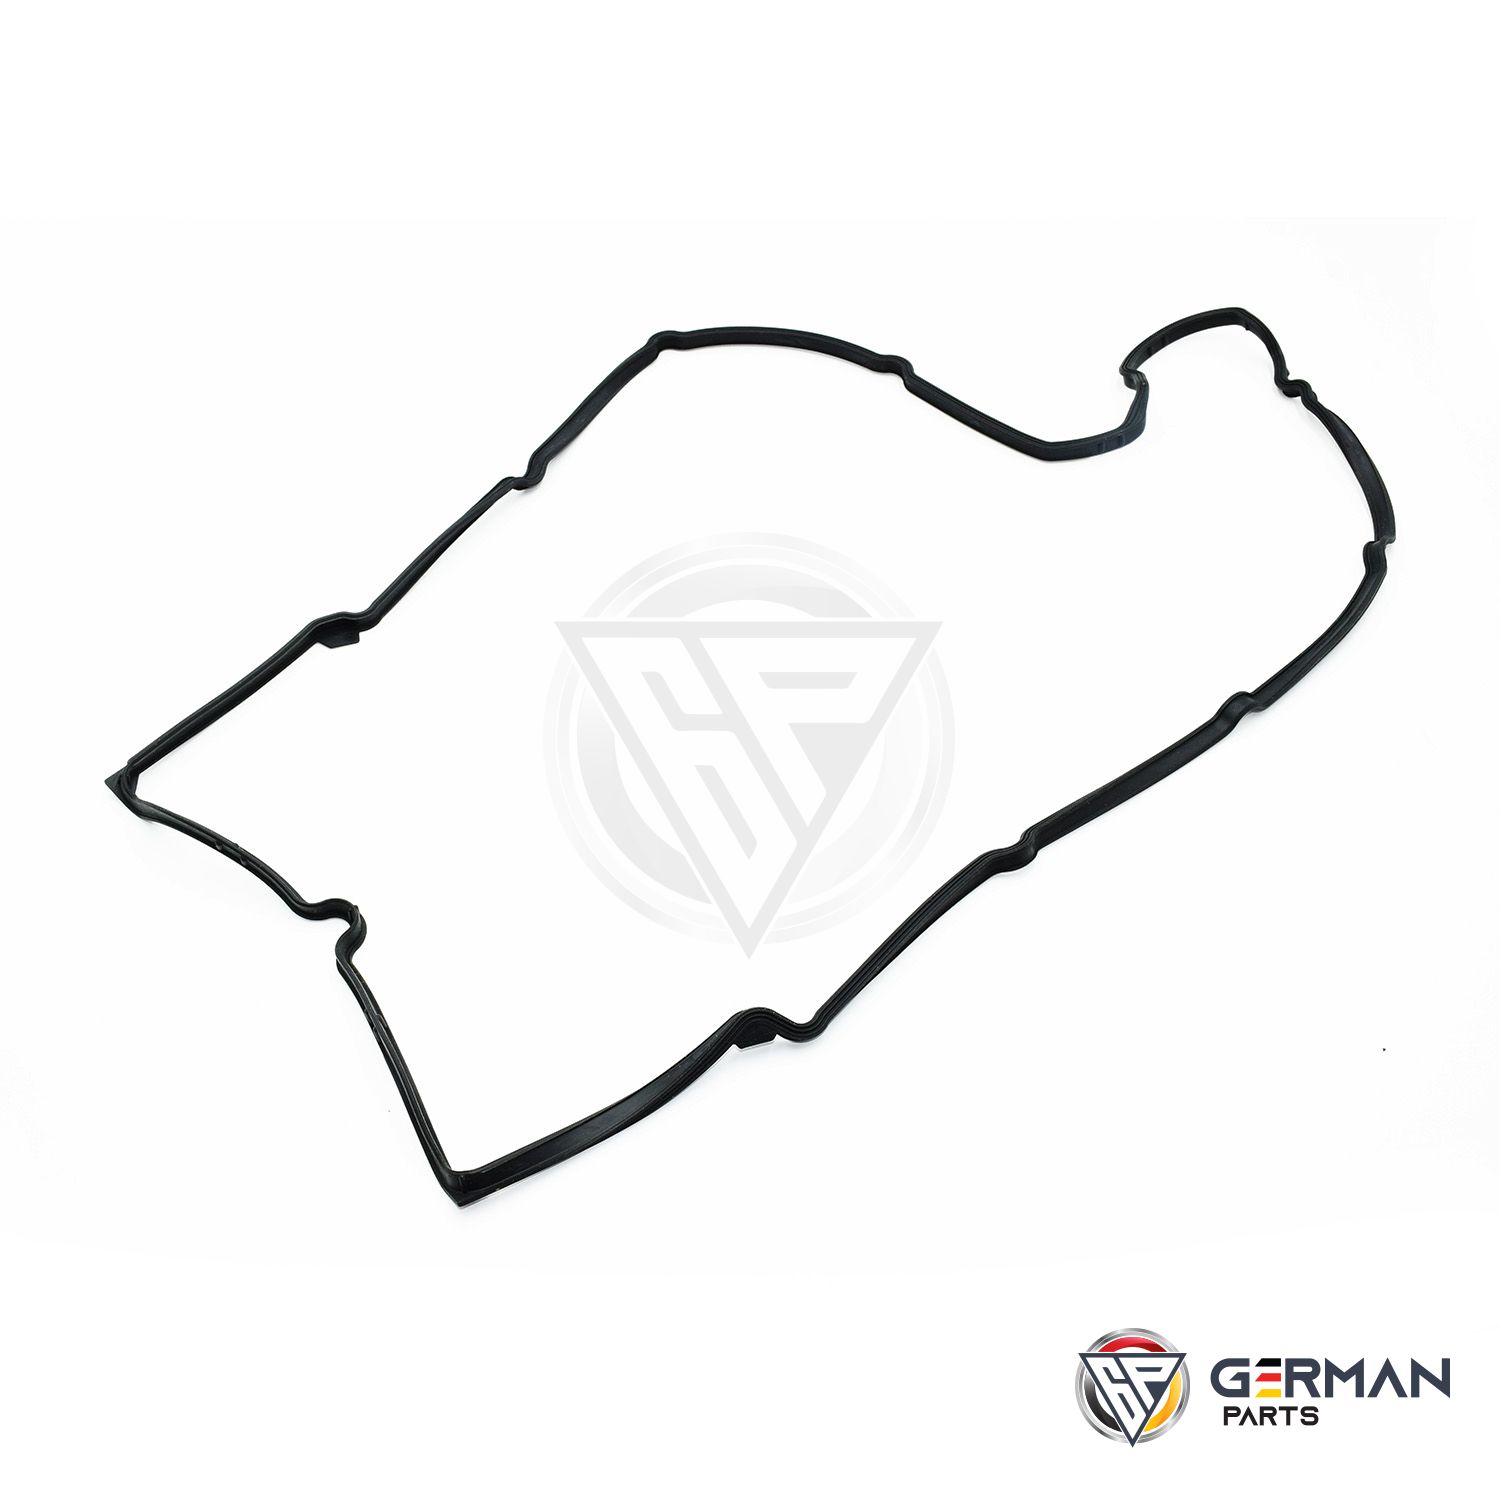 Buy Mercedes Benz Valve Cover Gasket Right 1560162421 - German Parts